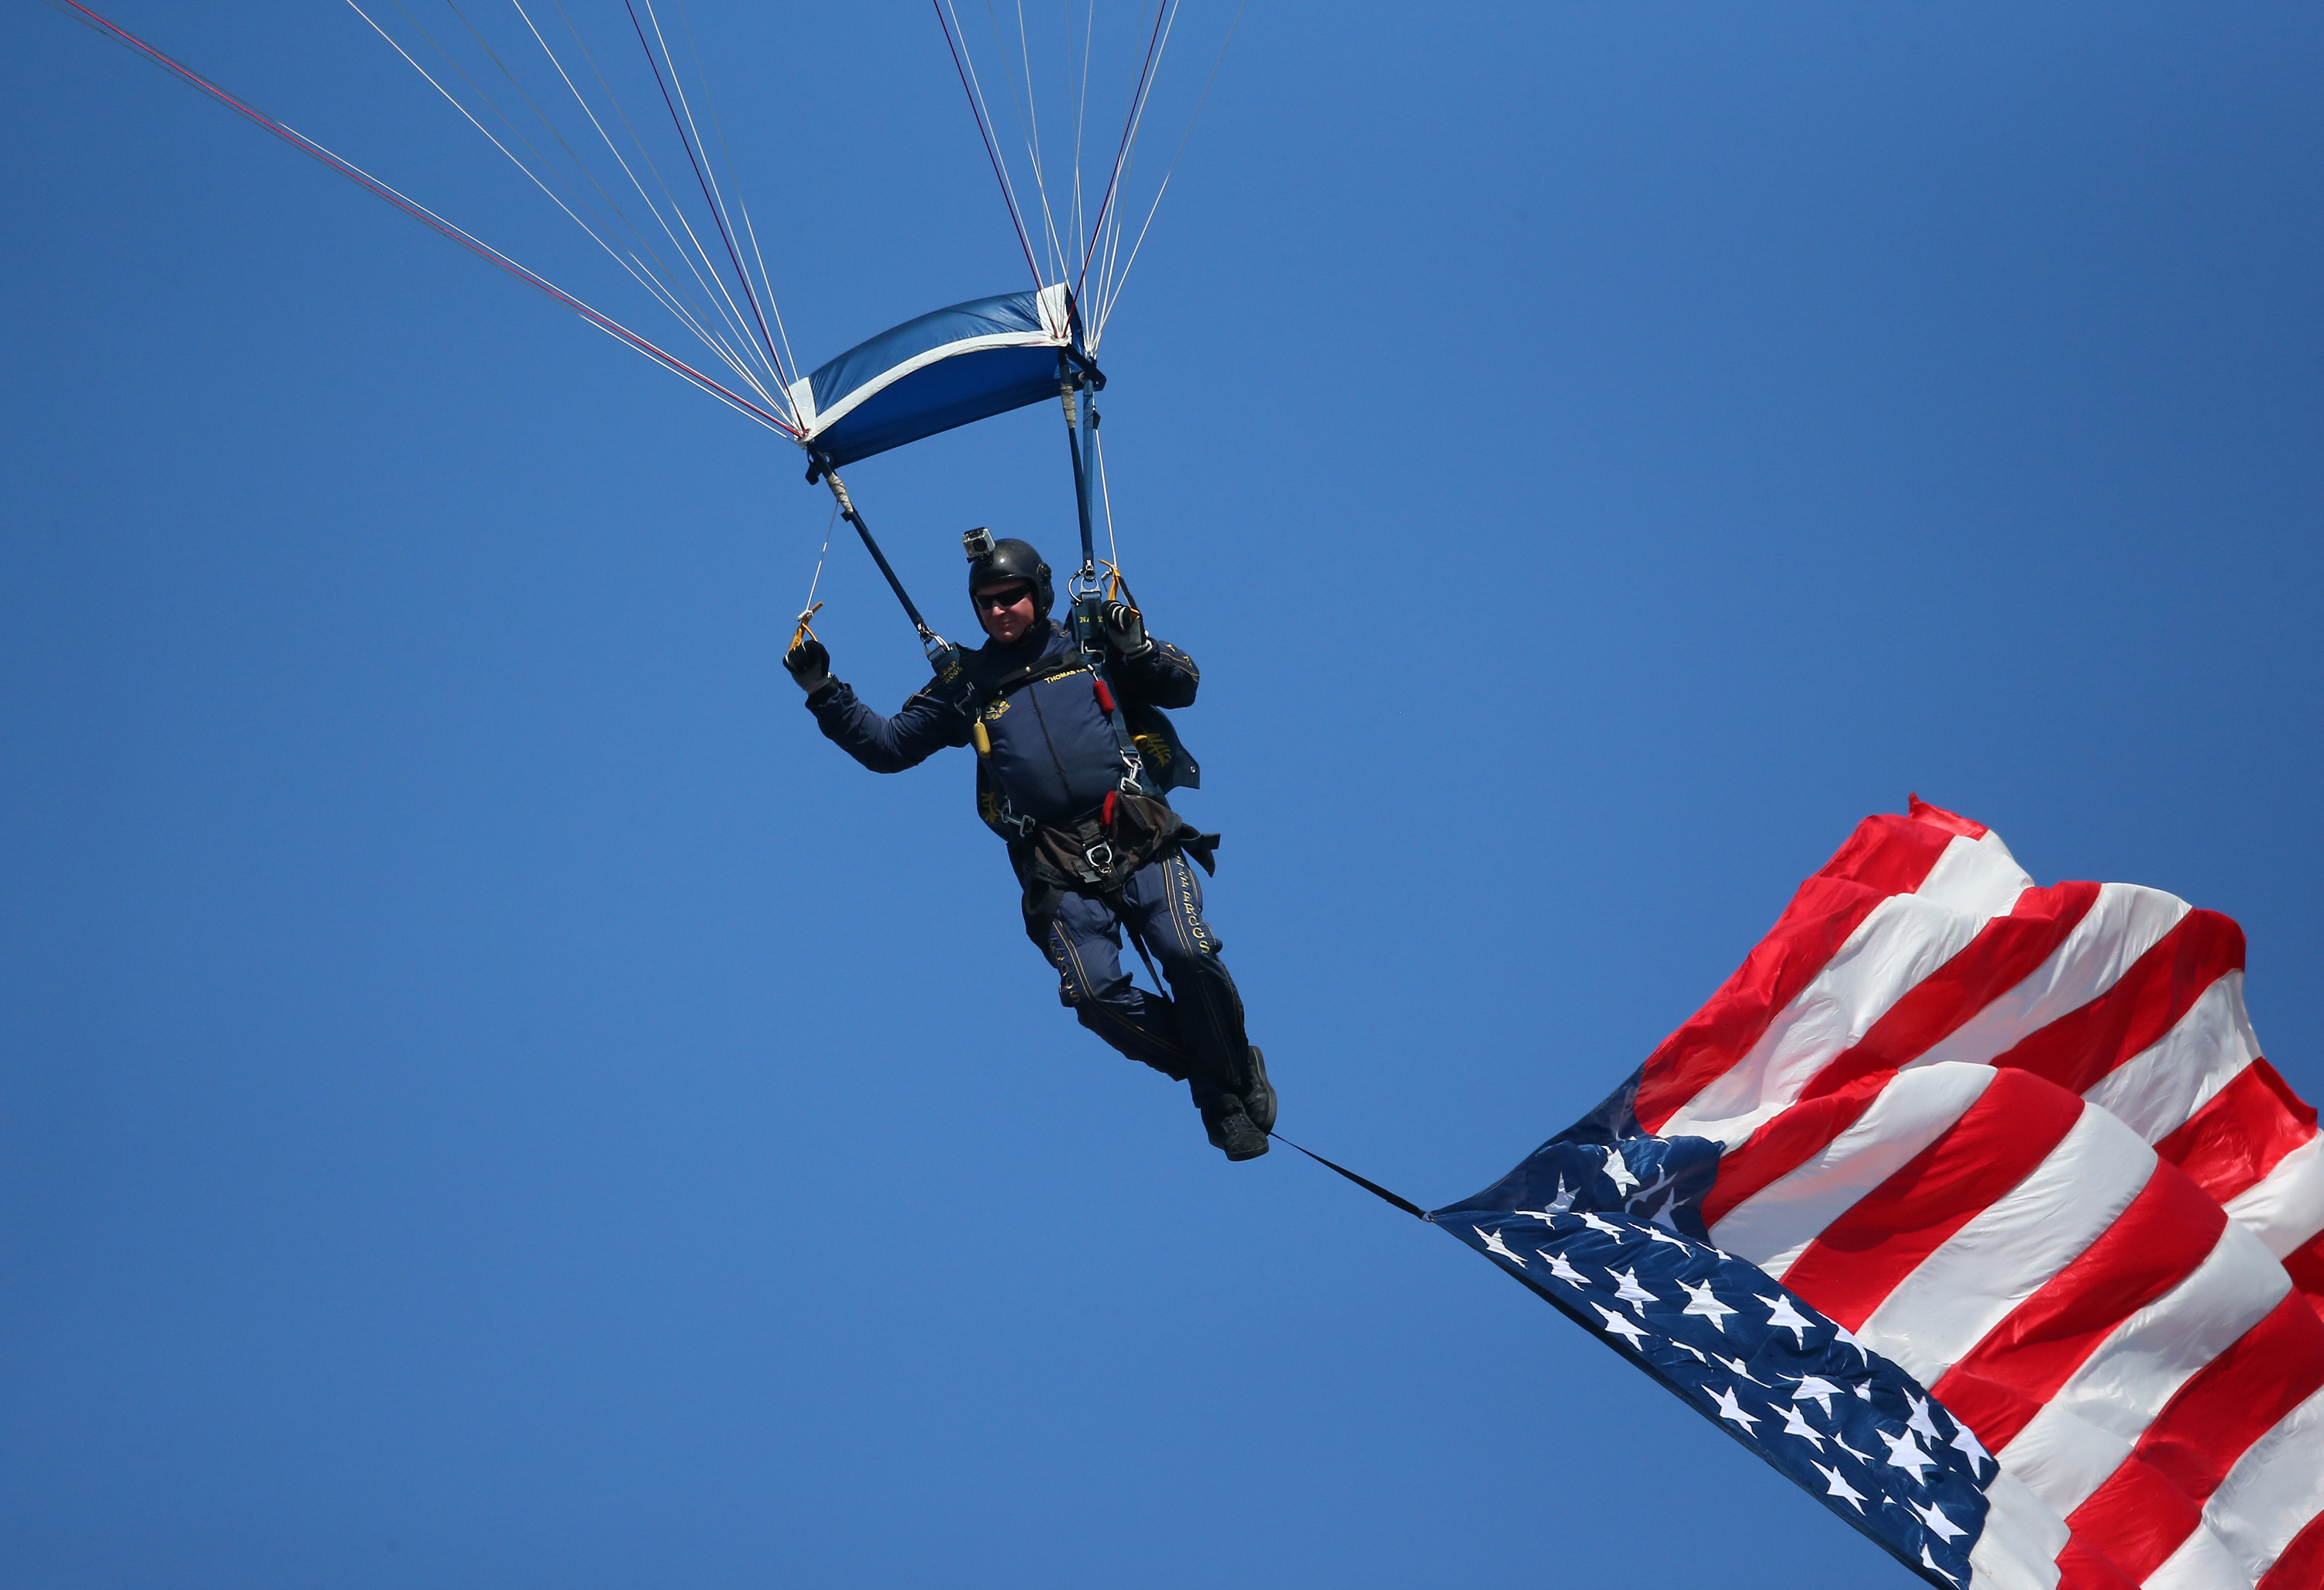 A NAVY Seal parachutes down before the start of the Buffalo Bills NFL game against the Kansas City Chiefs at Ralph Wilson Stadium on September 16, 2012 in Orchard Park, New York. (Tom Szczerbowski—Getty Images)